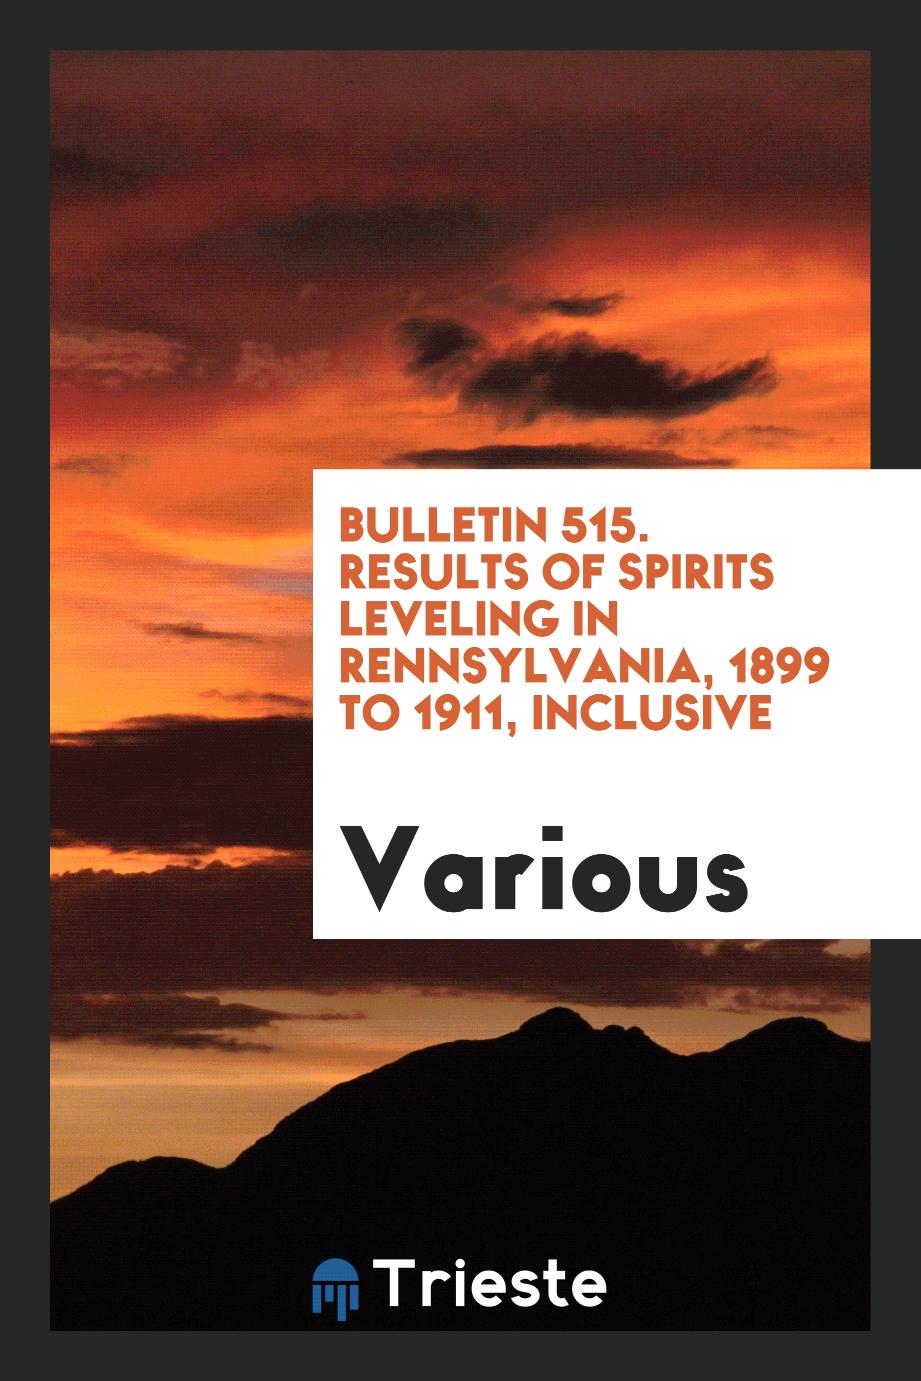 Bulletin 515. Results of Spirits Leveling in Rennsylvania, 1899 to 1911, Inclusive